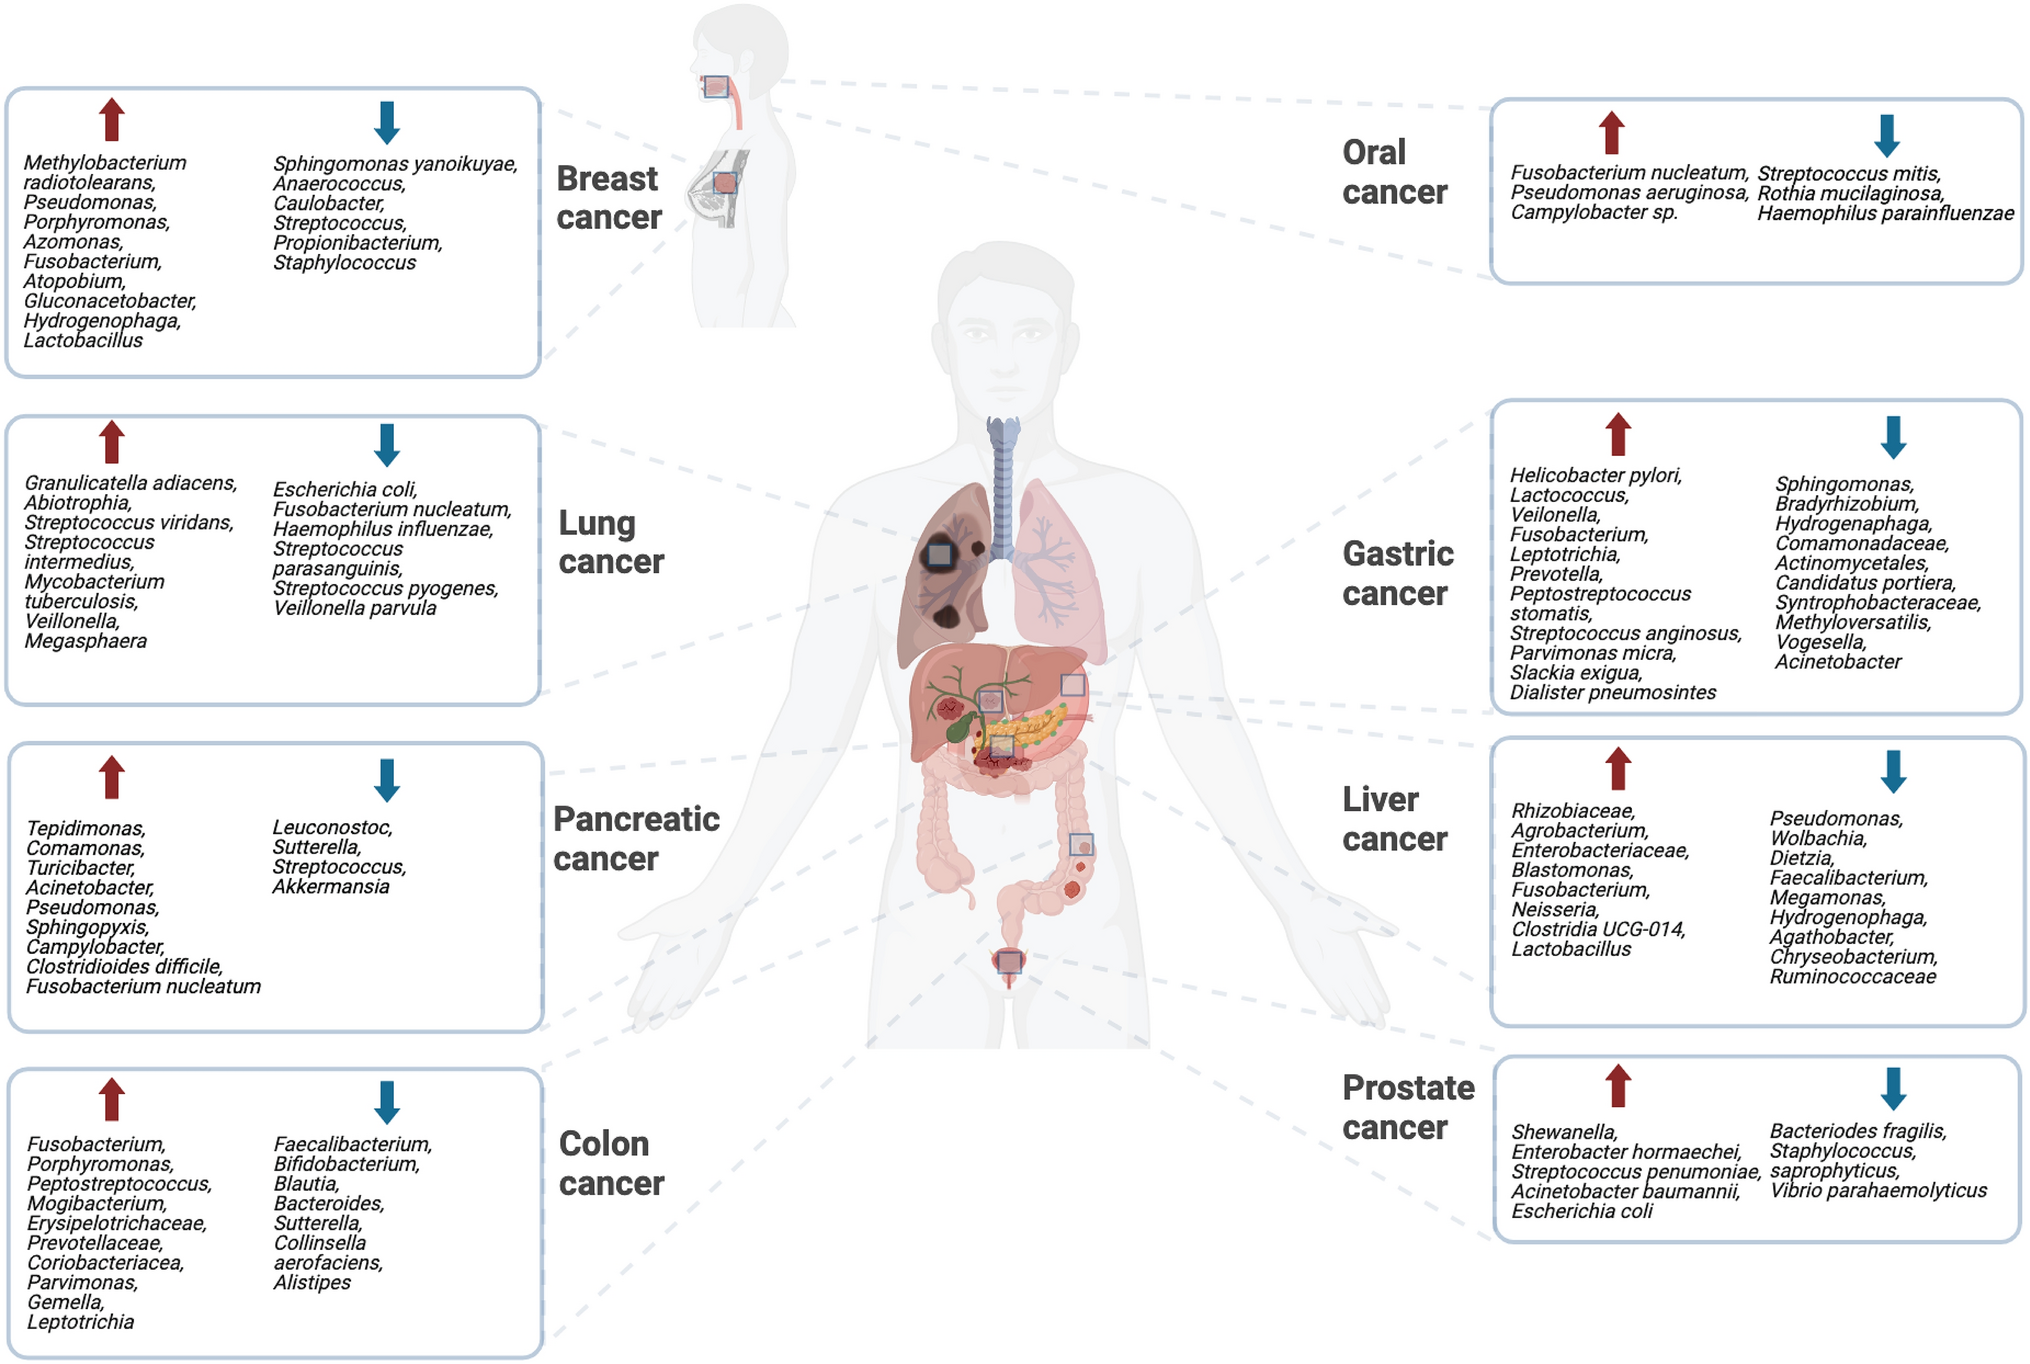 The Microbiome Matters: Its Impact on Cancer Development and Therapeutic Responses